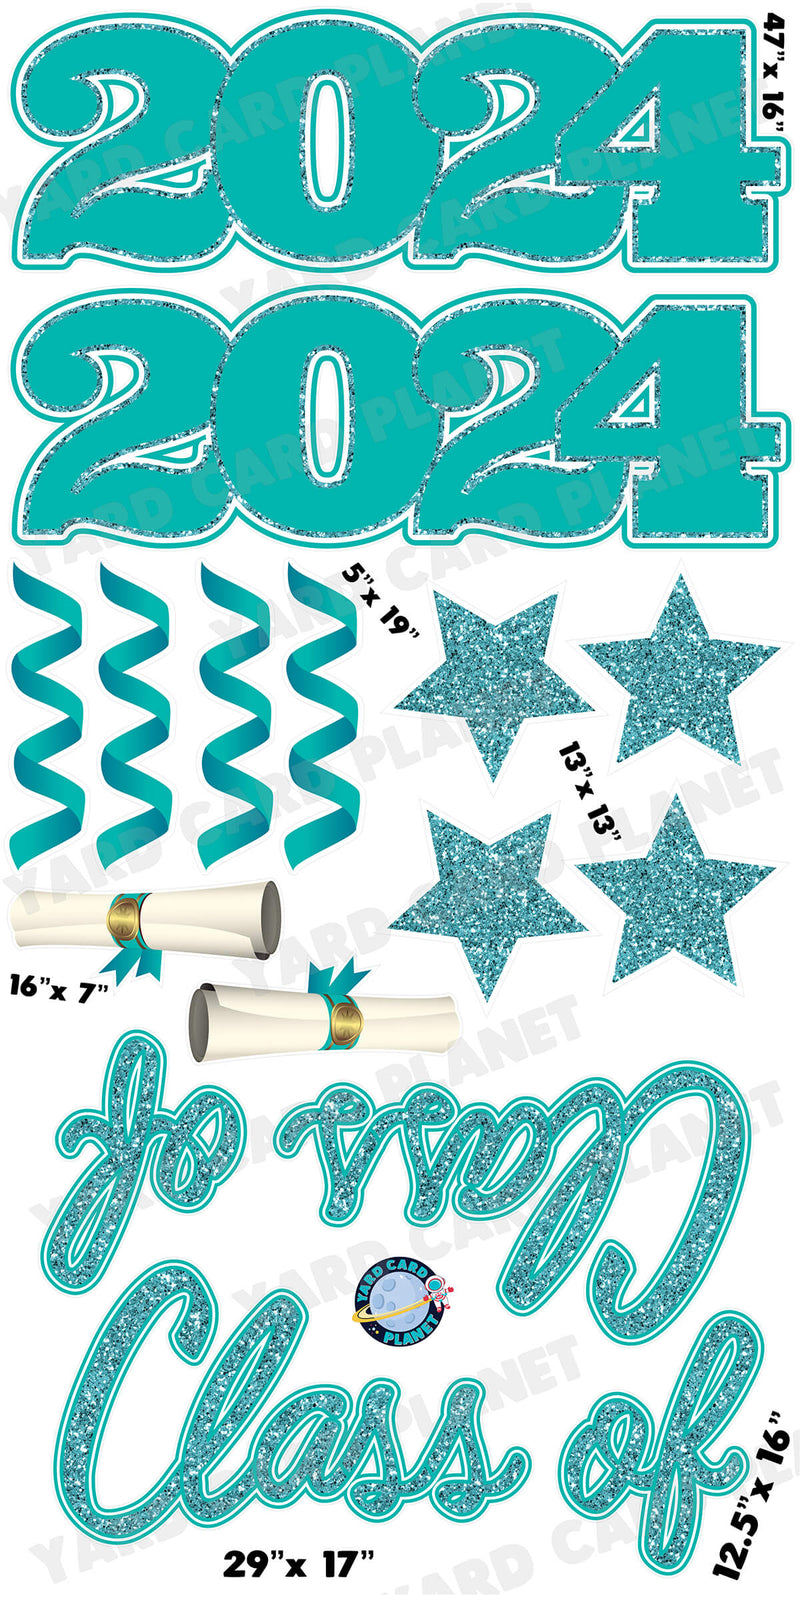 Teal Glitter Pattern Class of 2024 EZ Quick Set and Yard Card Flair Set